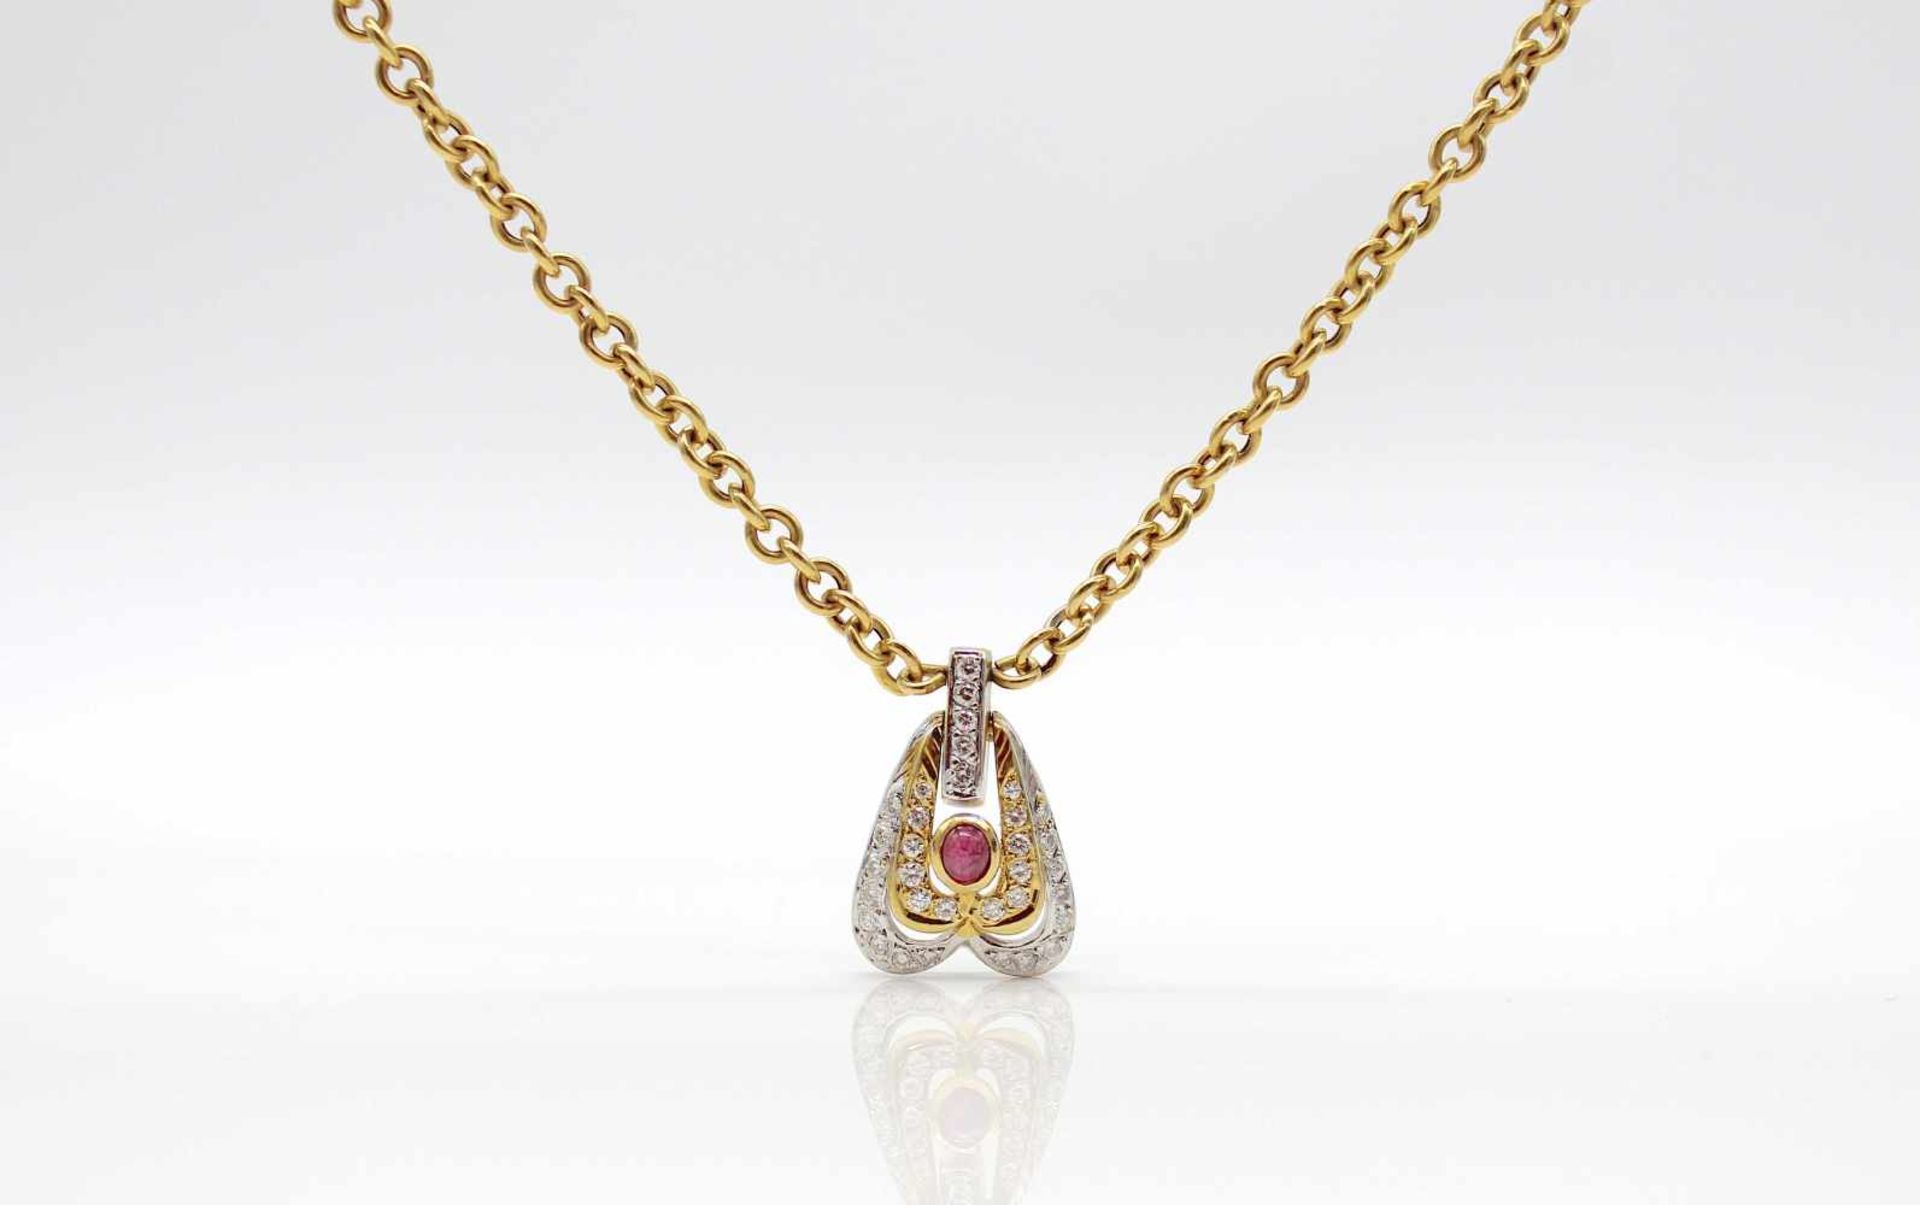 Collier tested to 21.6 ct gold platinized with a ruby and 33 diamonds, total approx. 0.60 ct in high